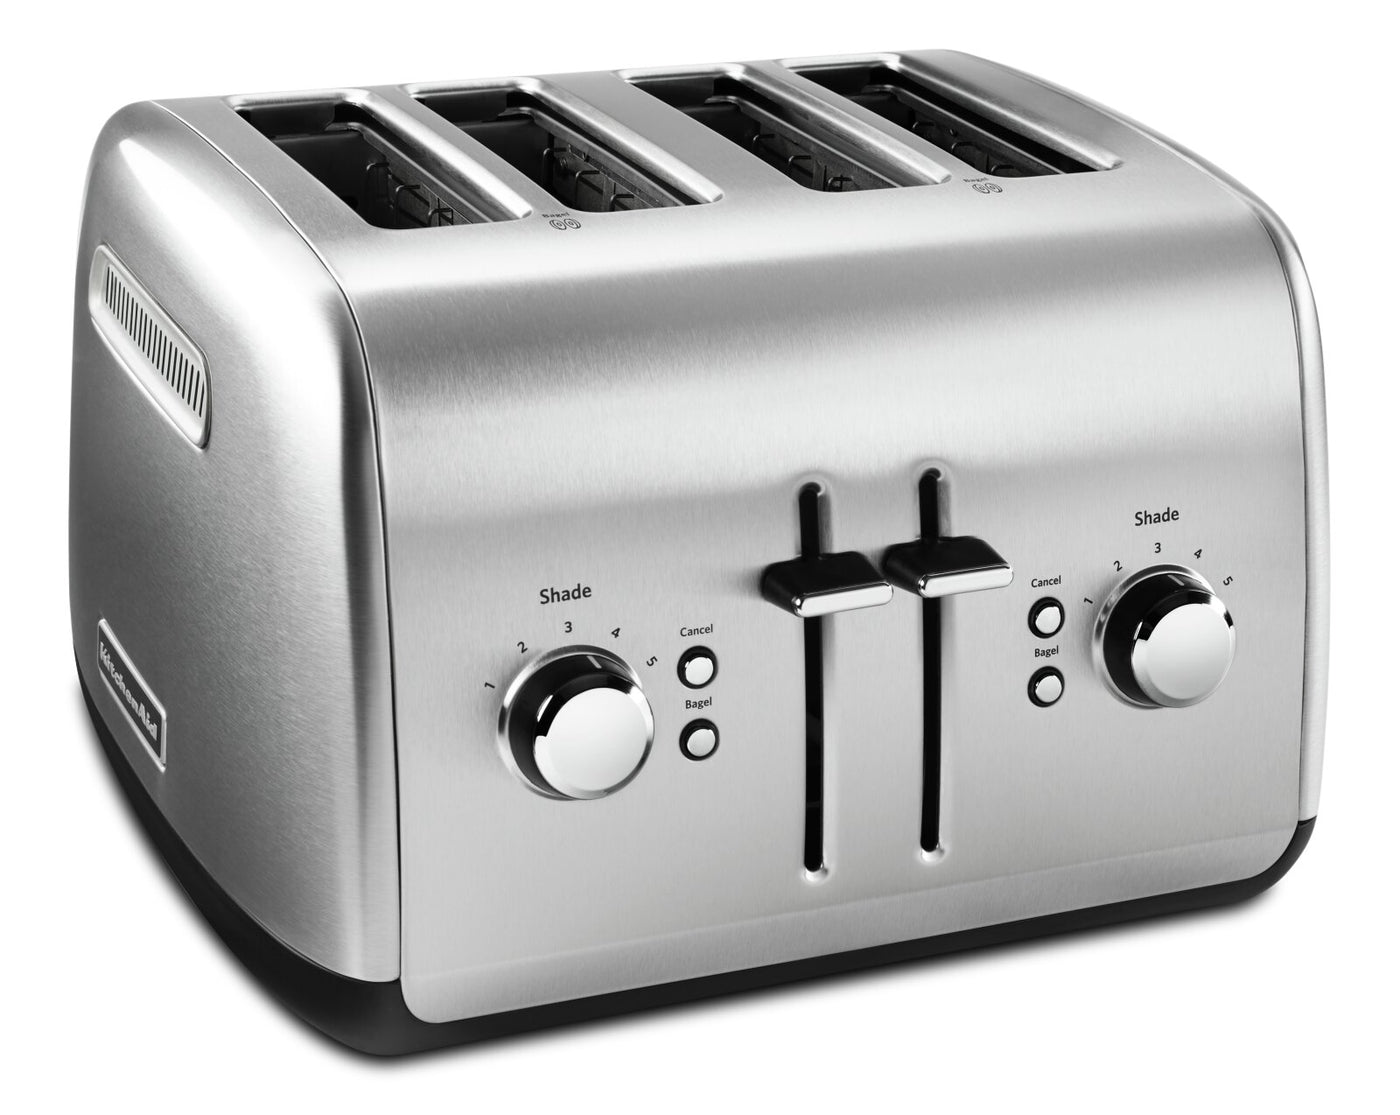 Kitchenaid 4 Slice Toaster With High Lift Lever Kmt4115sx The